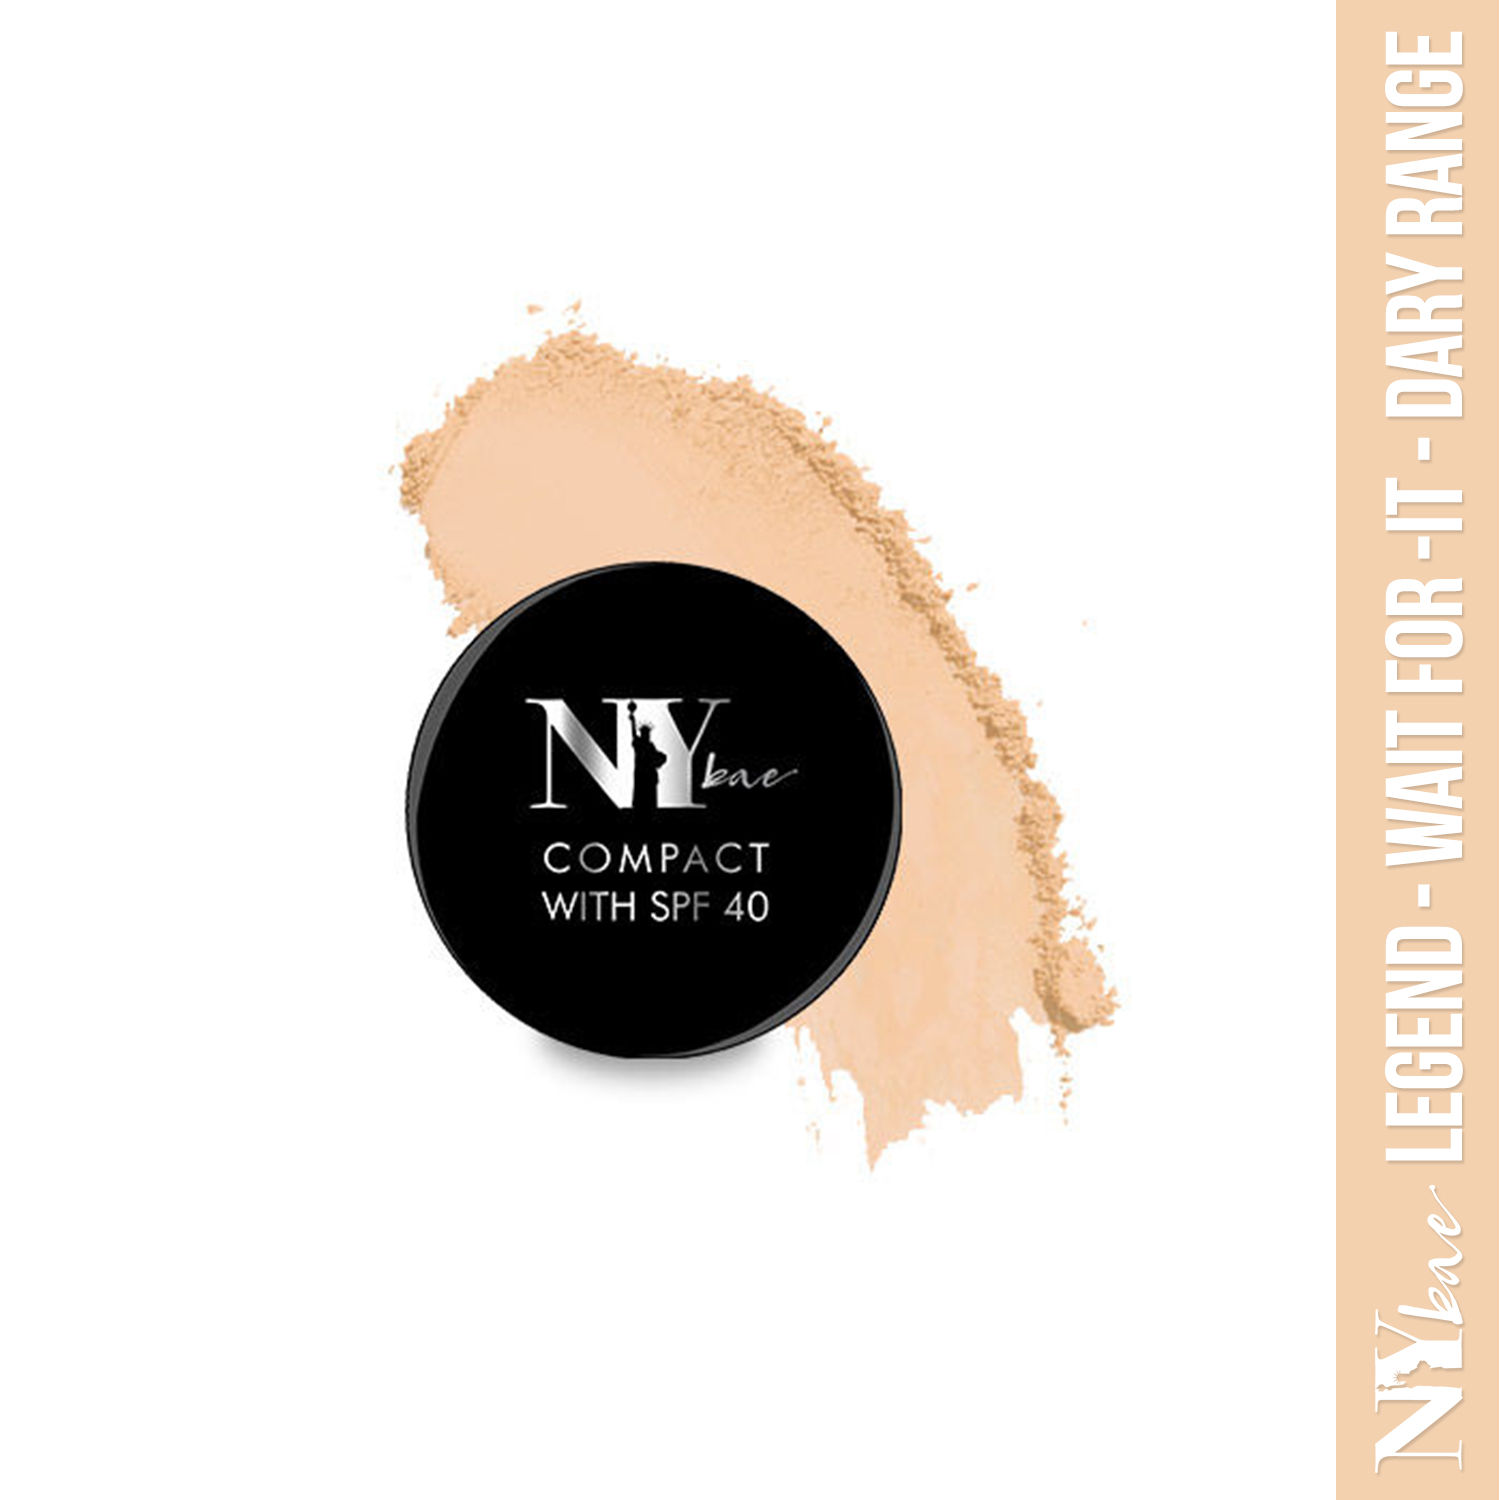 Buy NY Bae Legend - Wait For It - Dary Compact Powder with SPF 40 - Lily’s Warm Beige Look 1 (9 g) - Purplle